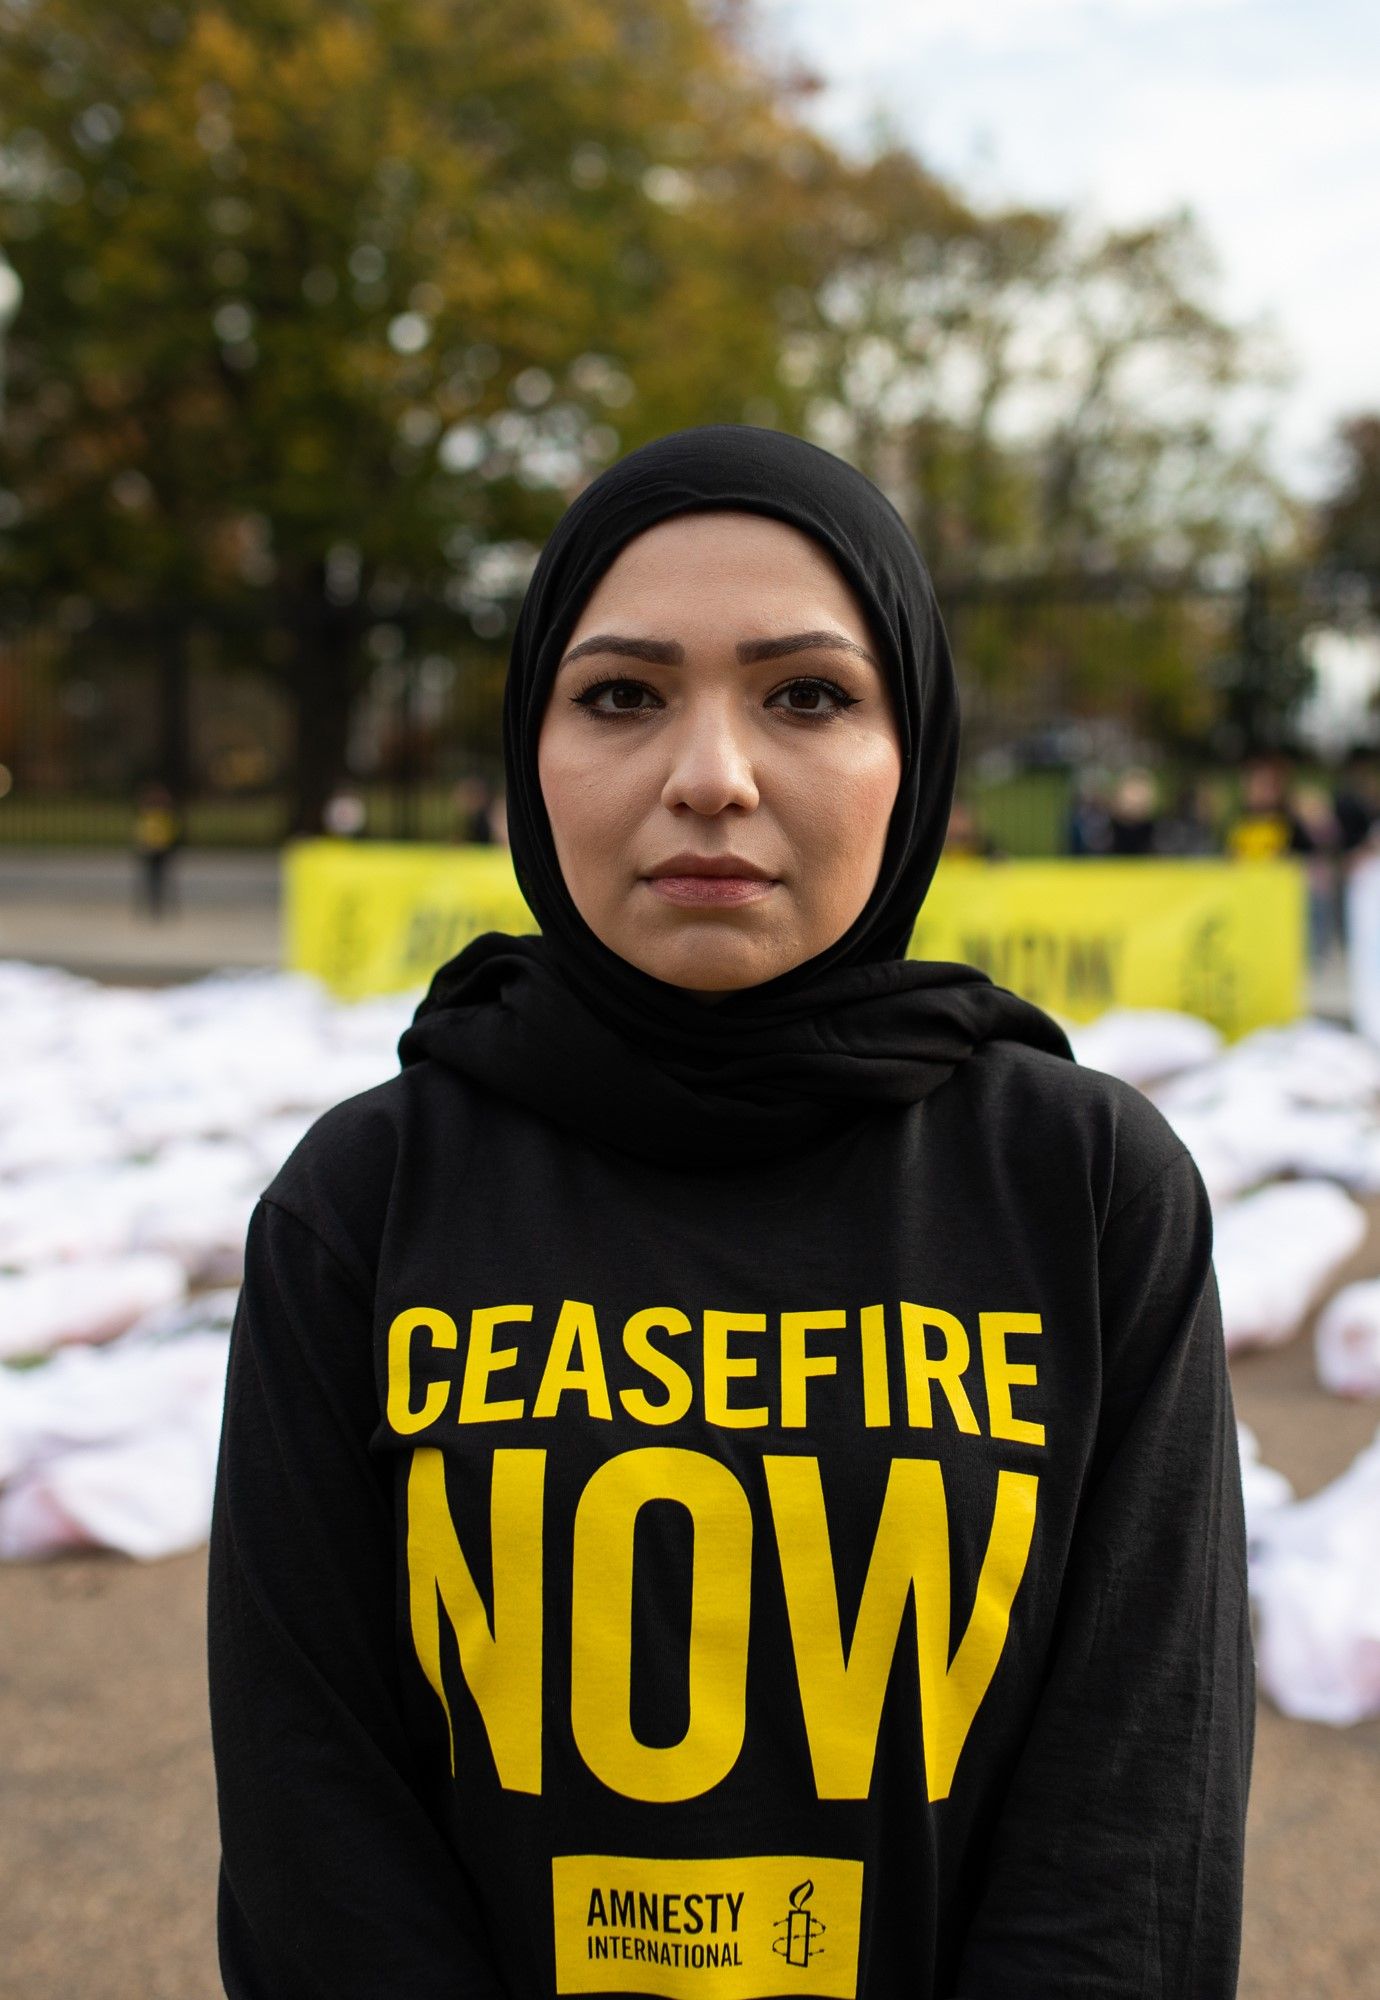 An amnesty supporter wears a tshirt calling for a ceasefire in Gaza